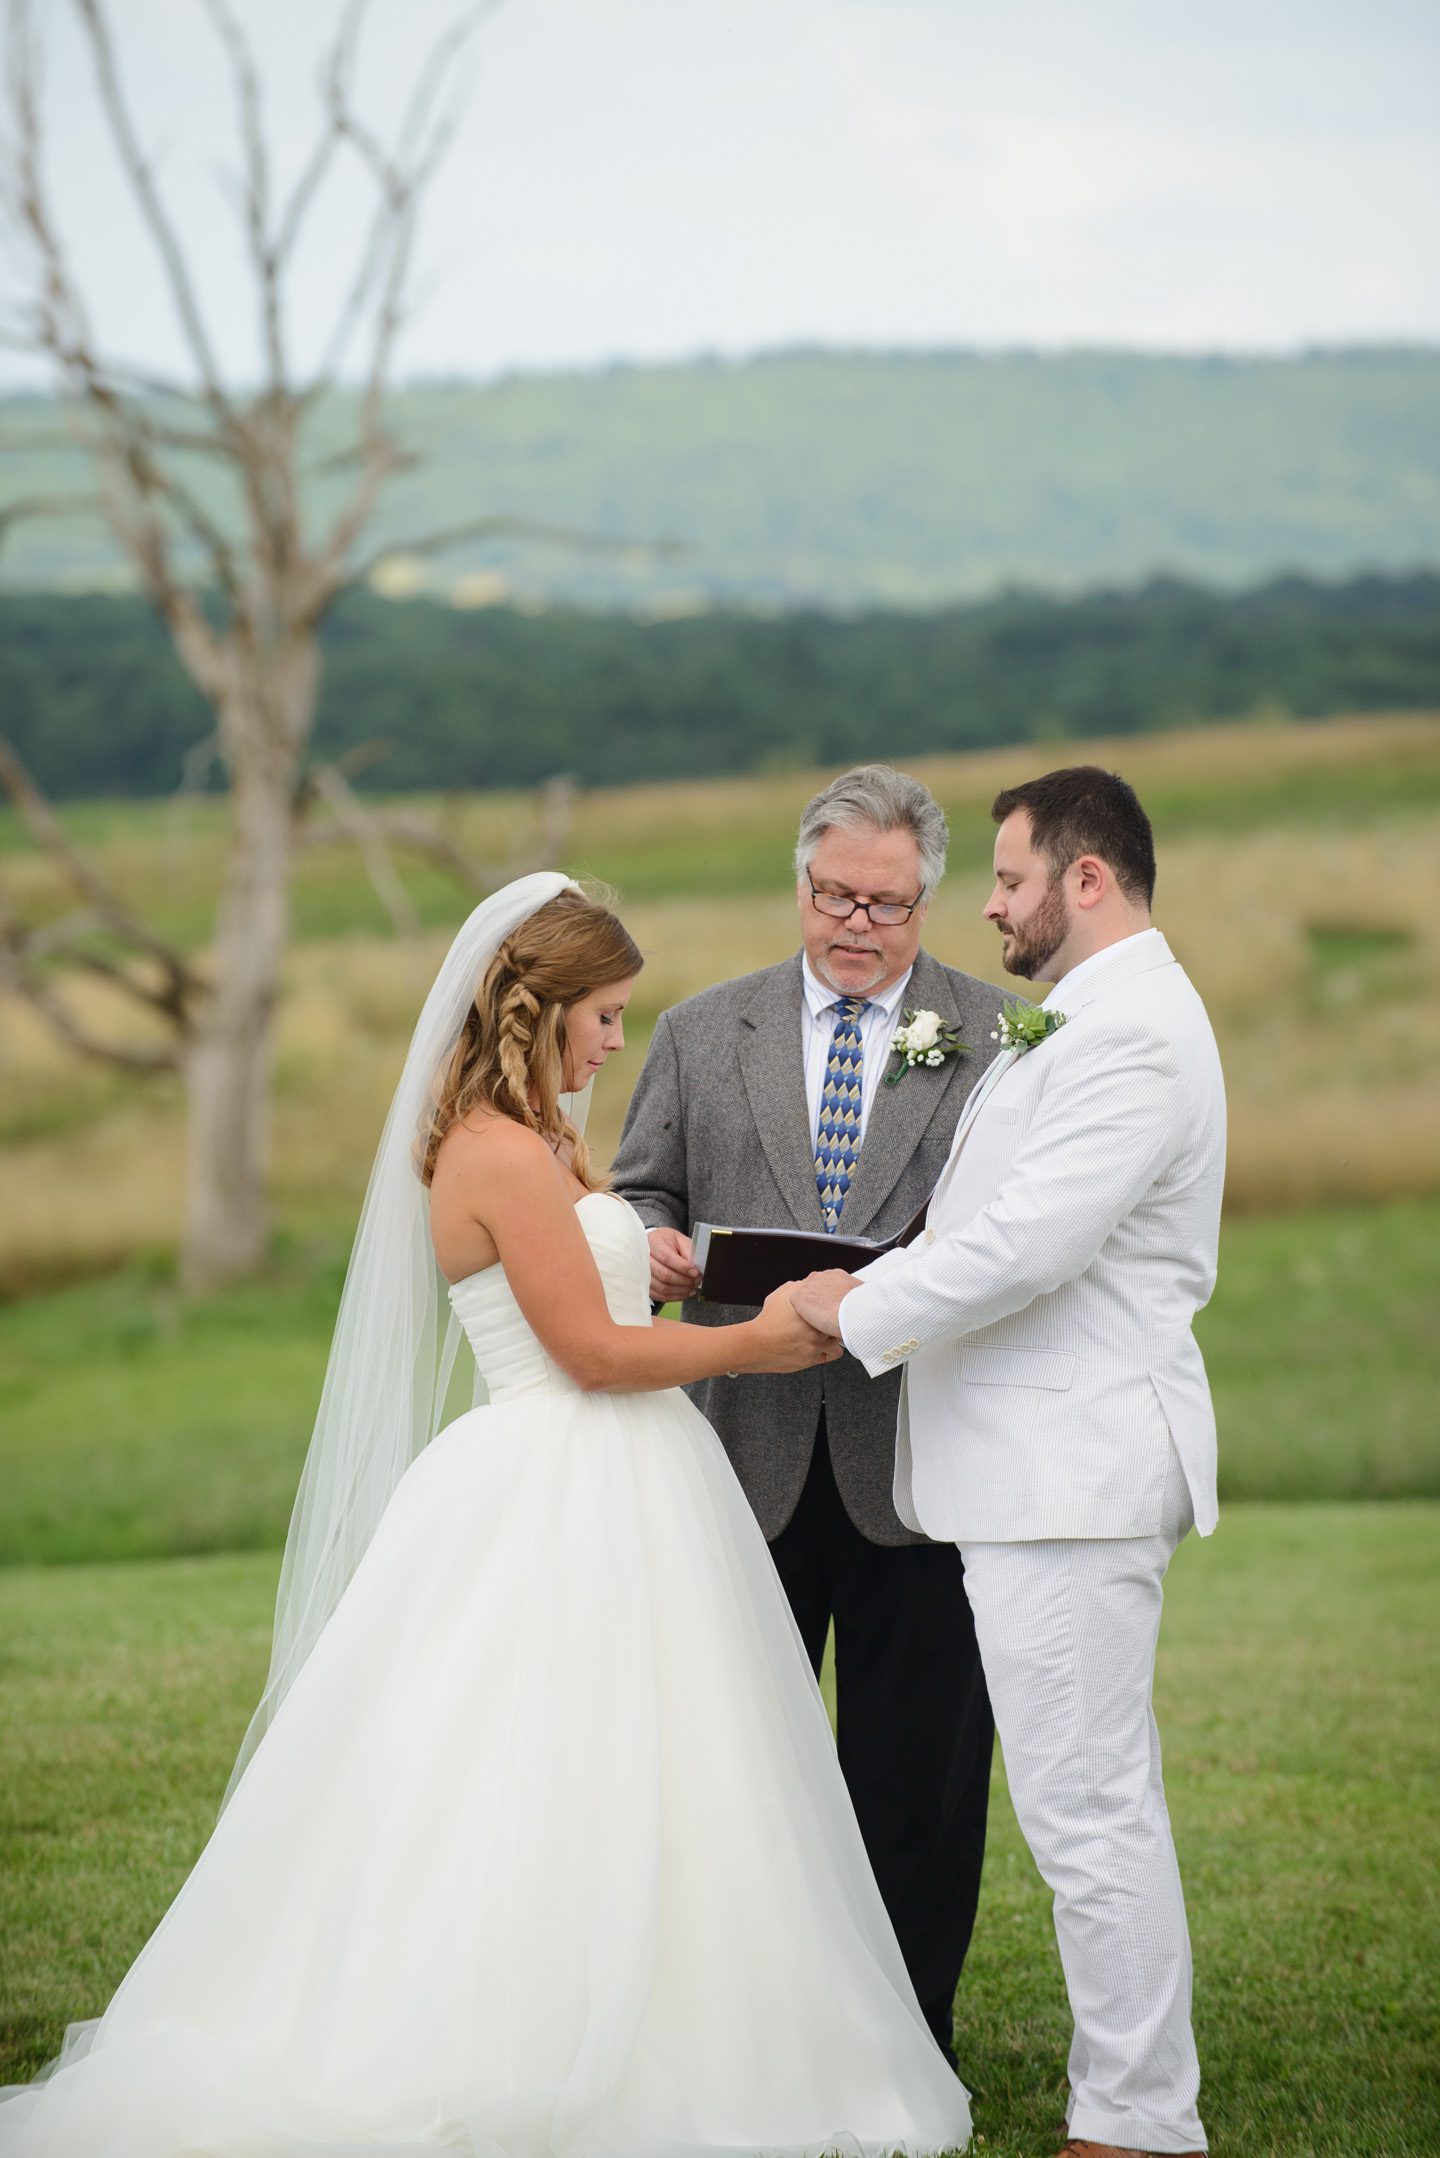 Kelly and Nathan by Neil GT Photography Sinkland Farms Christiansburg VA Wedding Ceremony Bride Groom